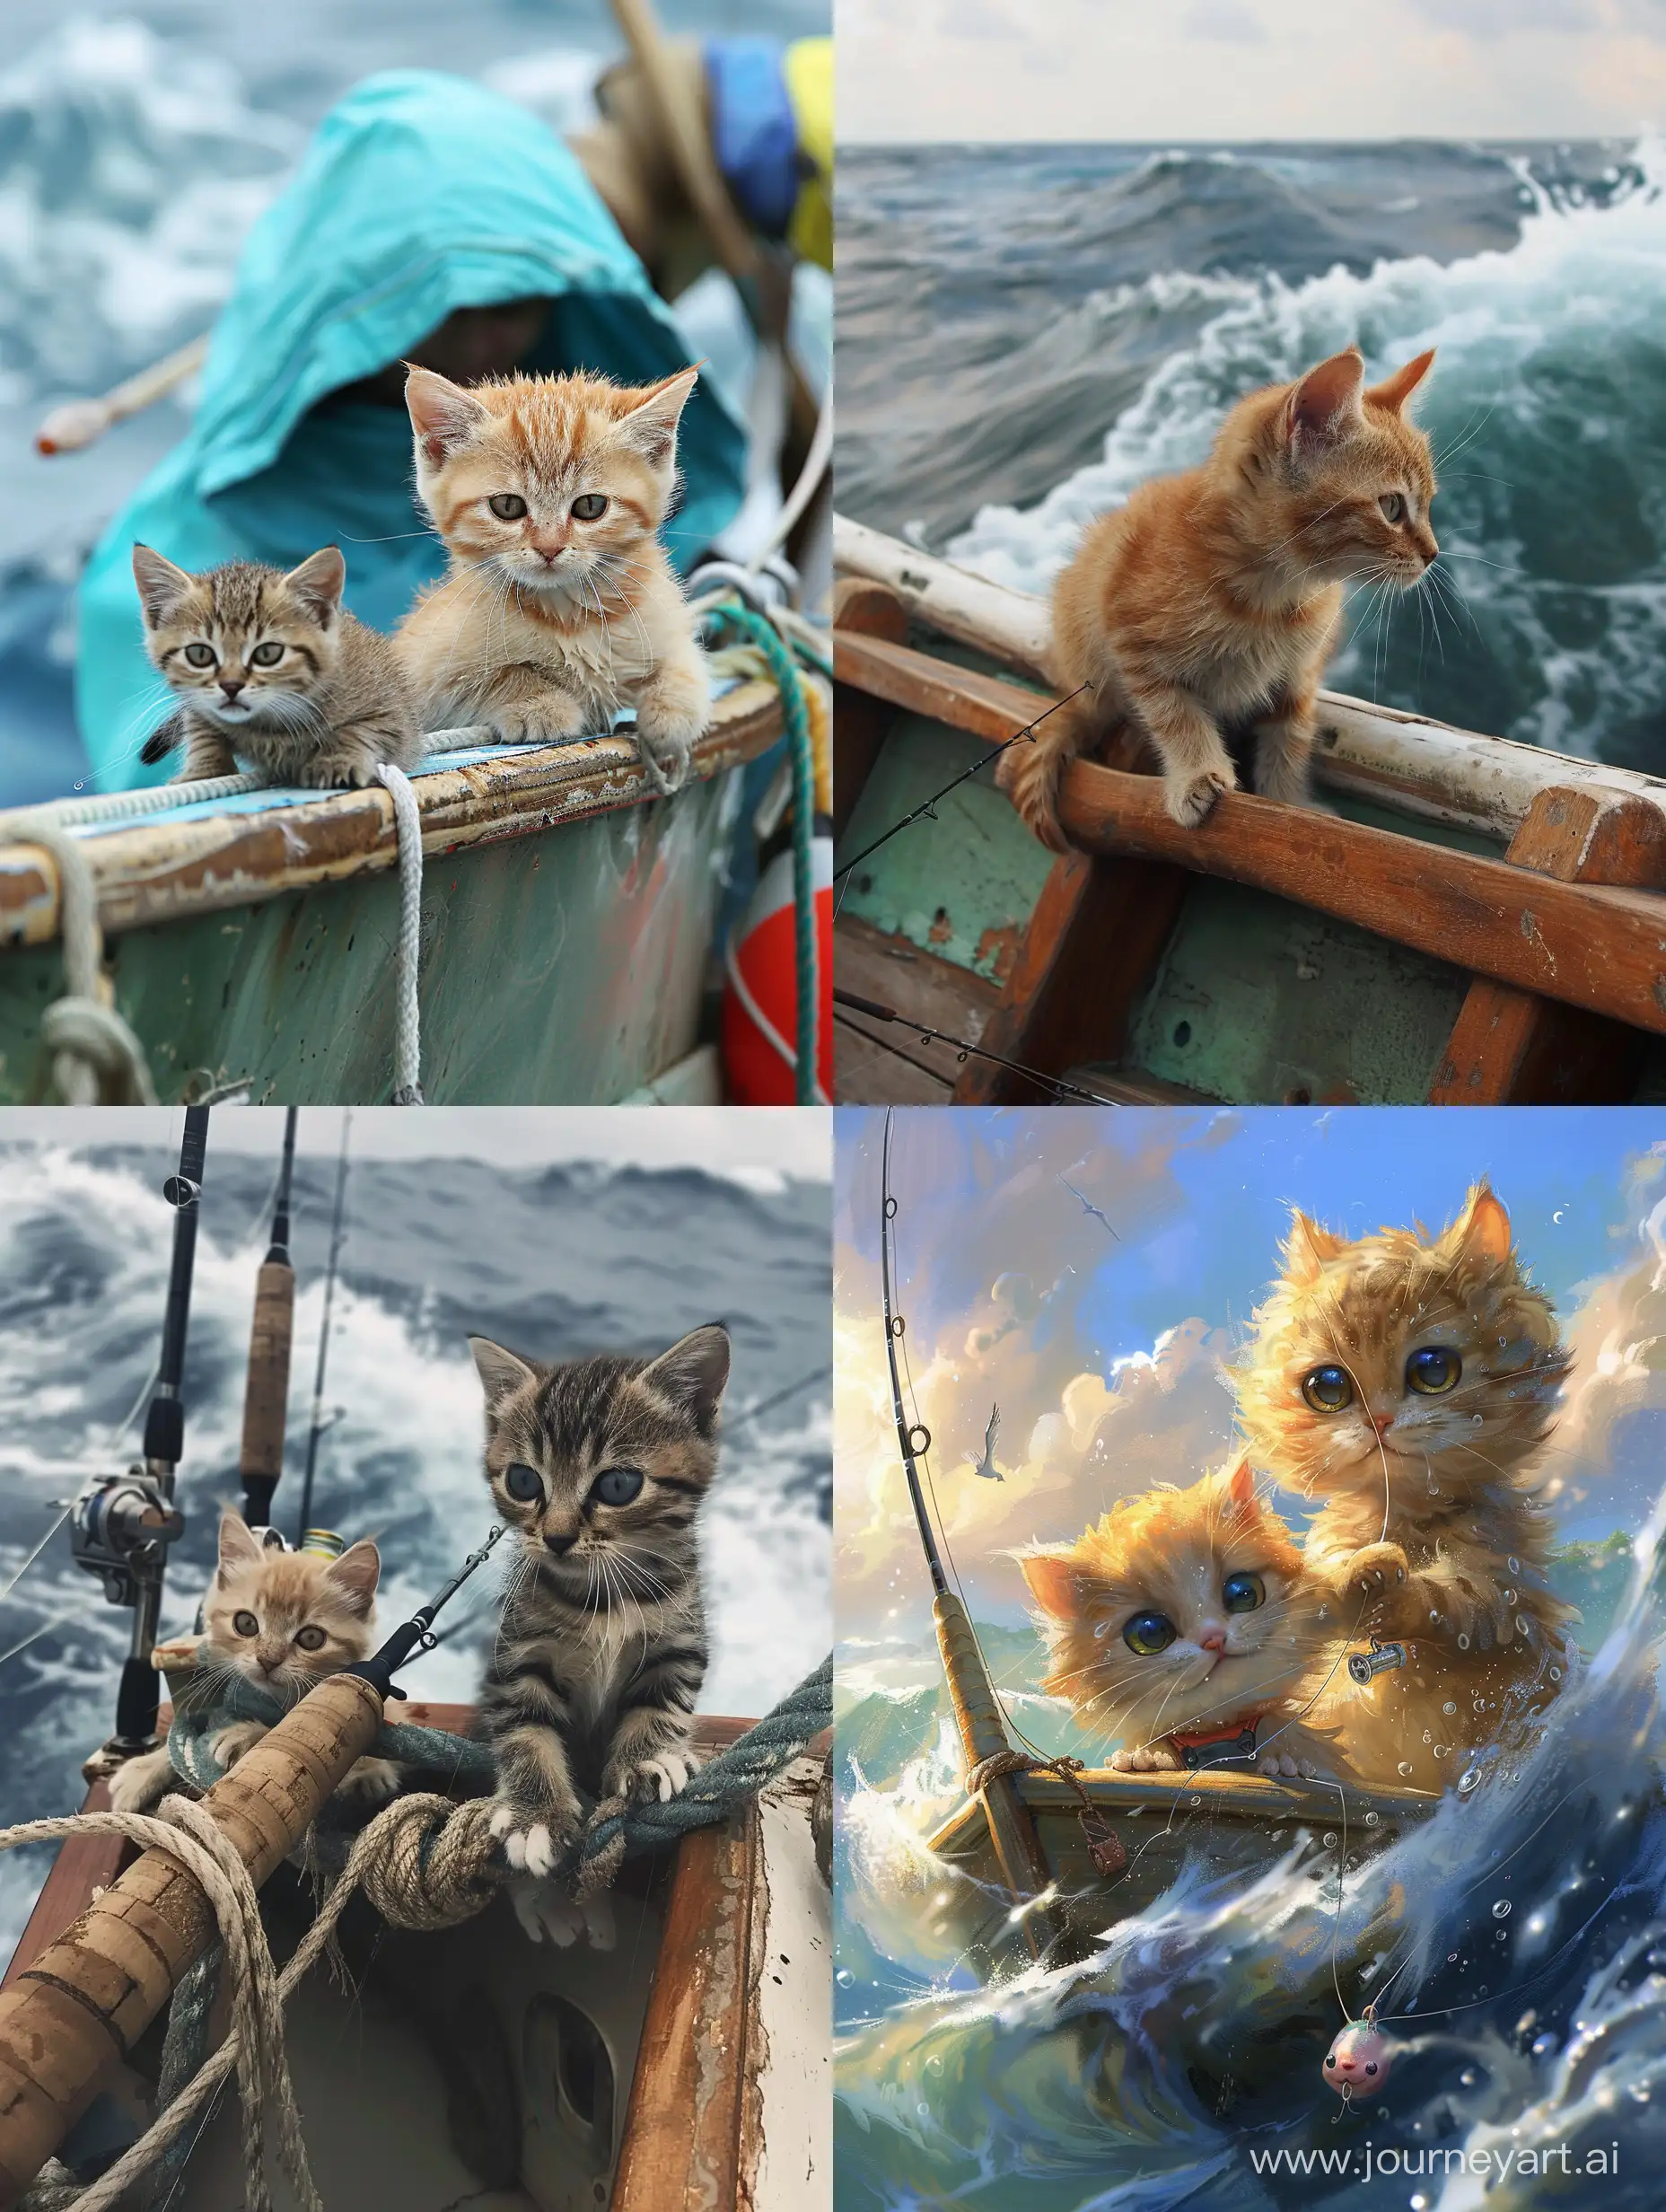 Father-and-Kitten-Fishing-Together-on-a-Turbulent-Sea-Fishing-Boat